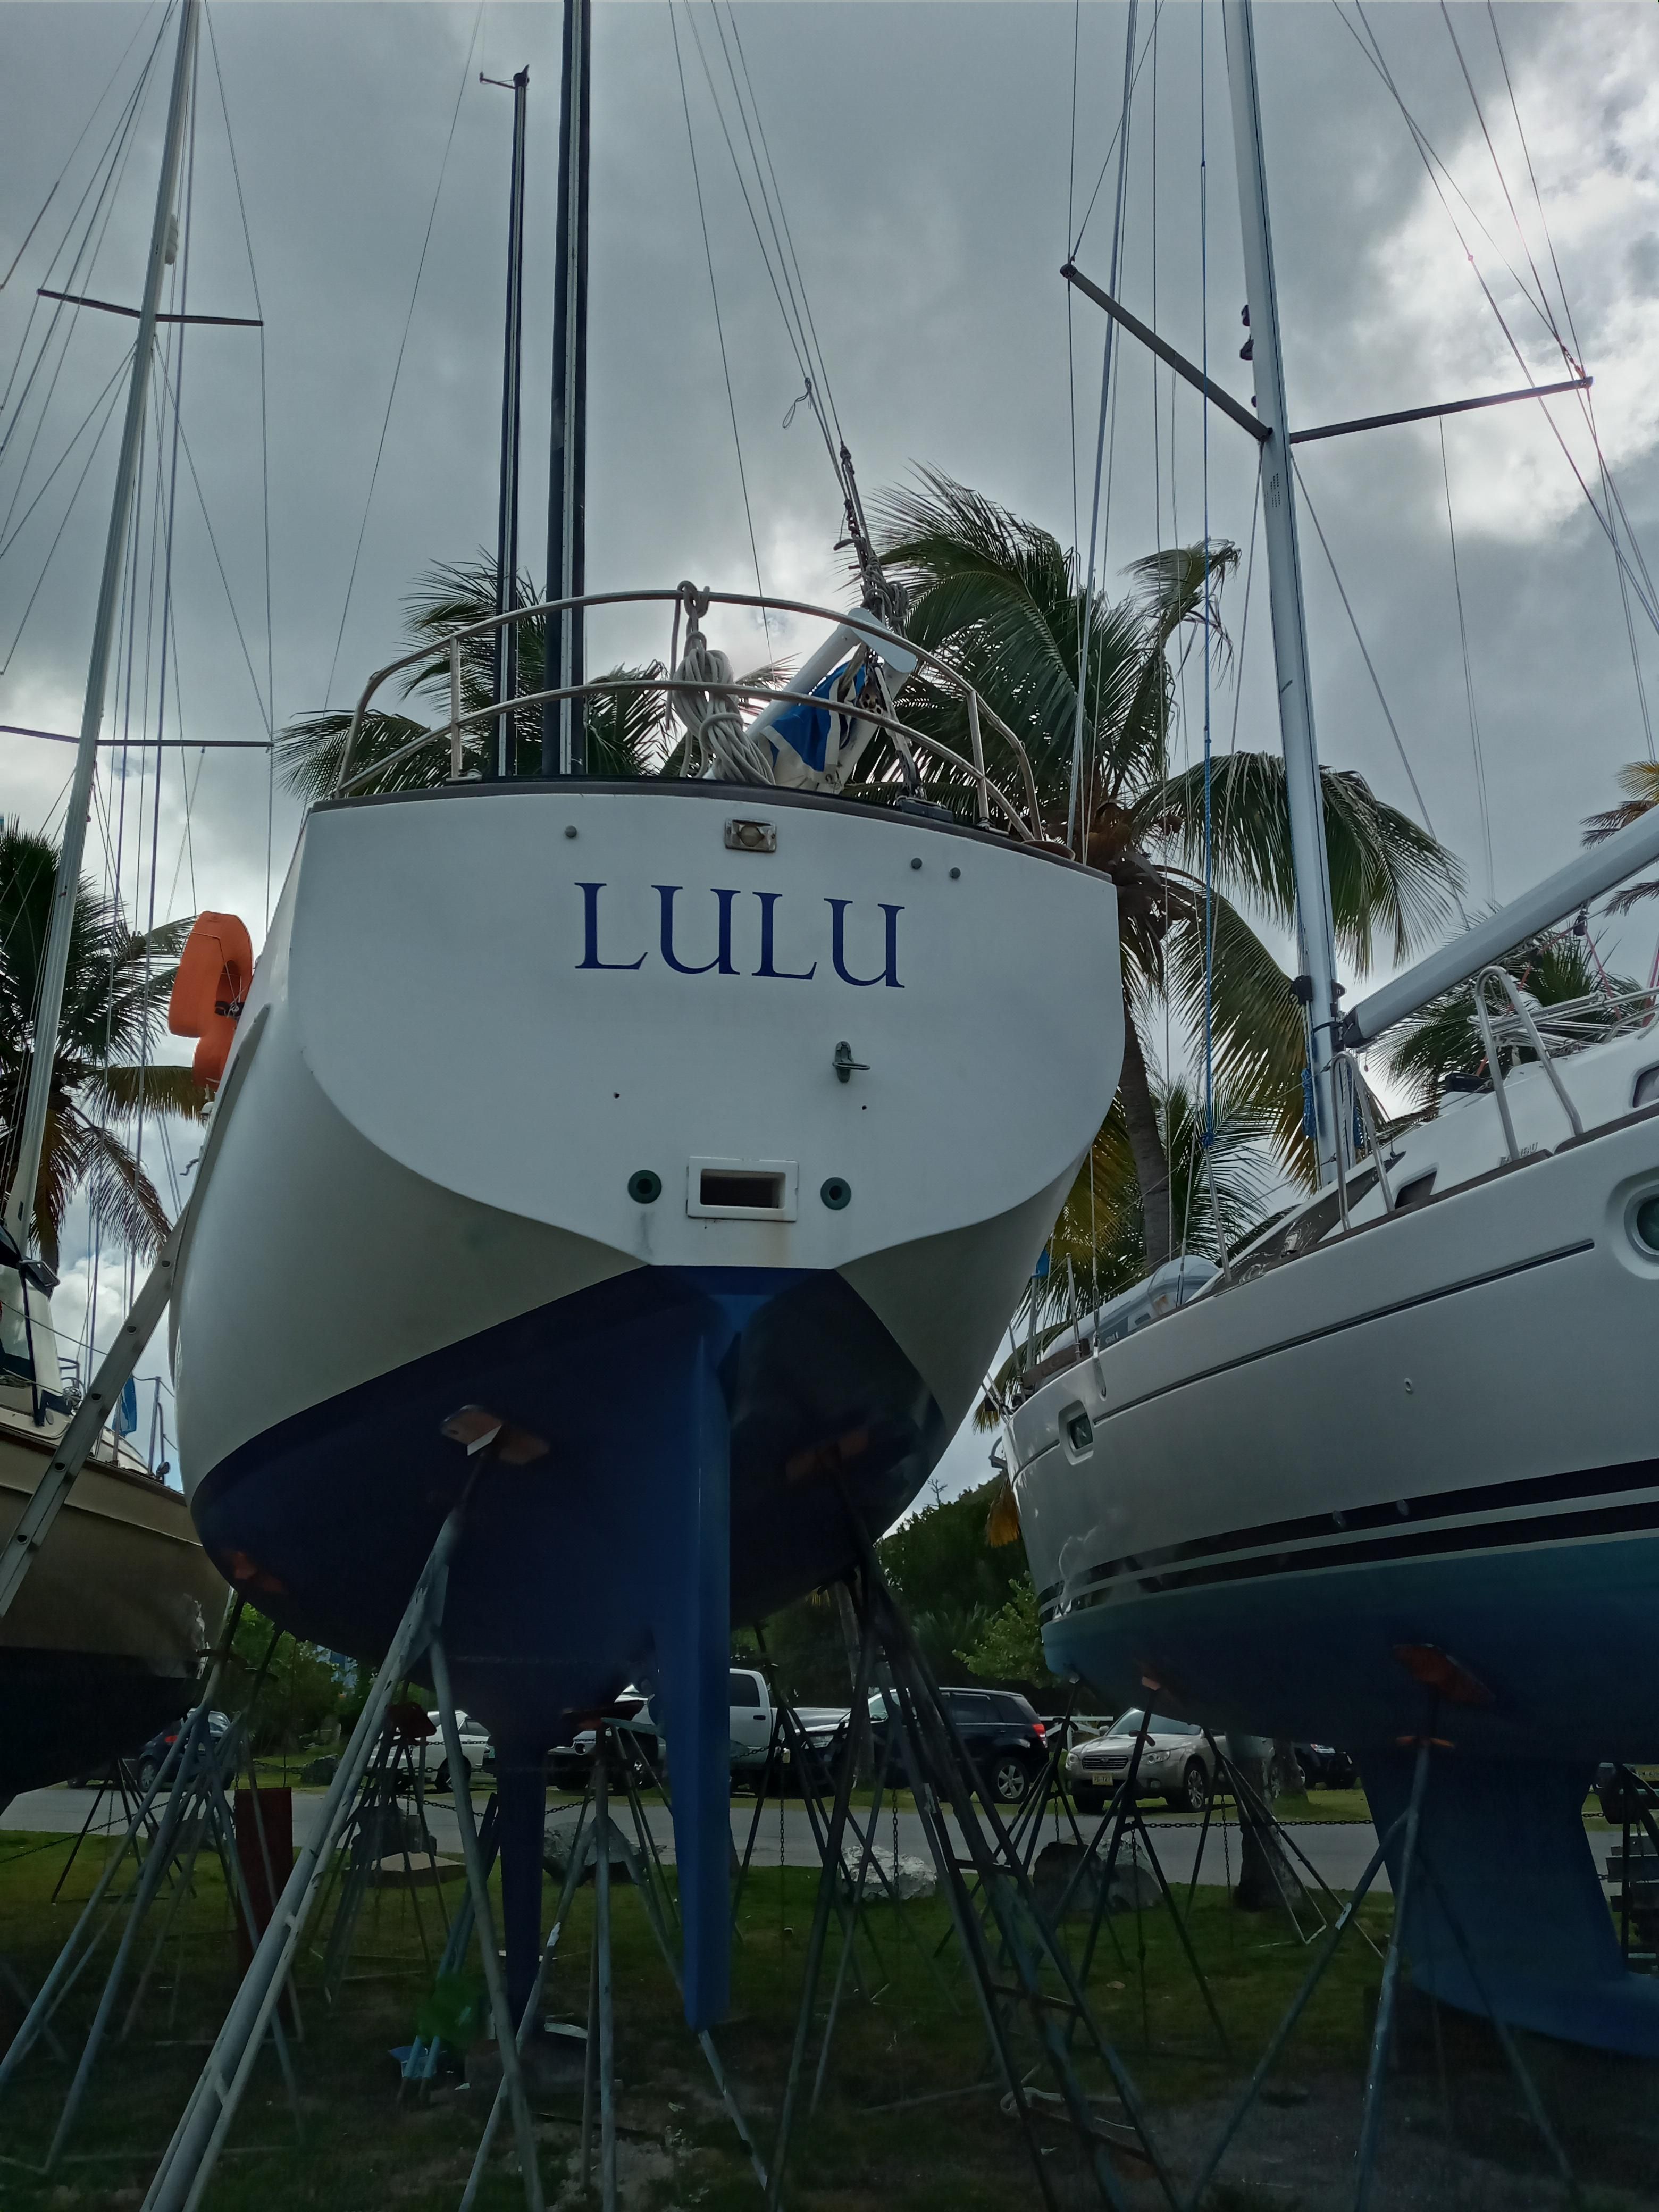 freedom 44 sailboat for sale